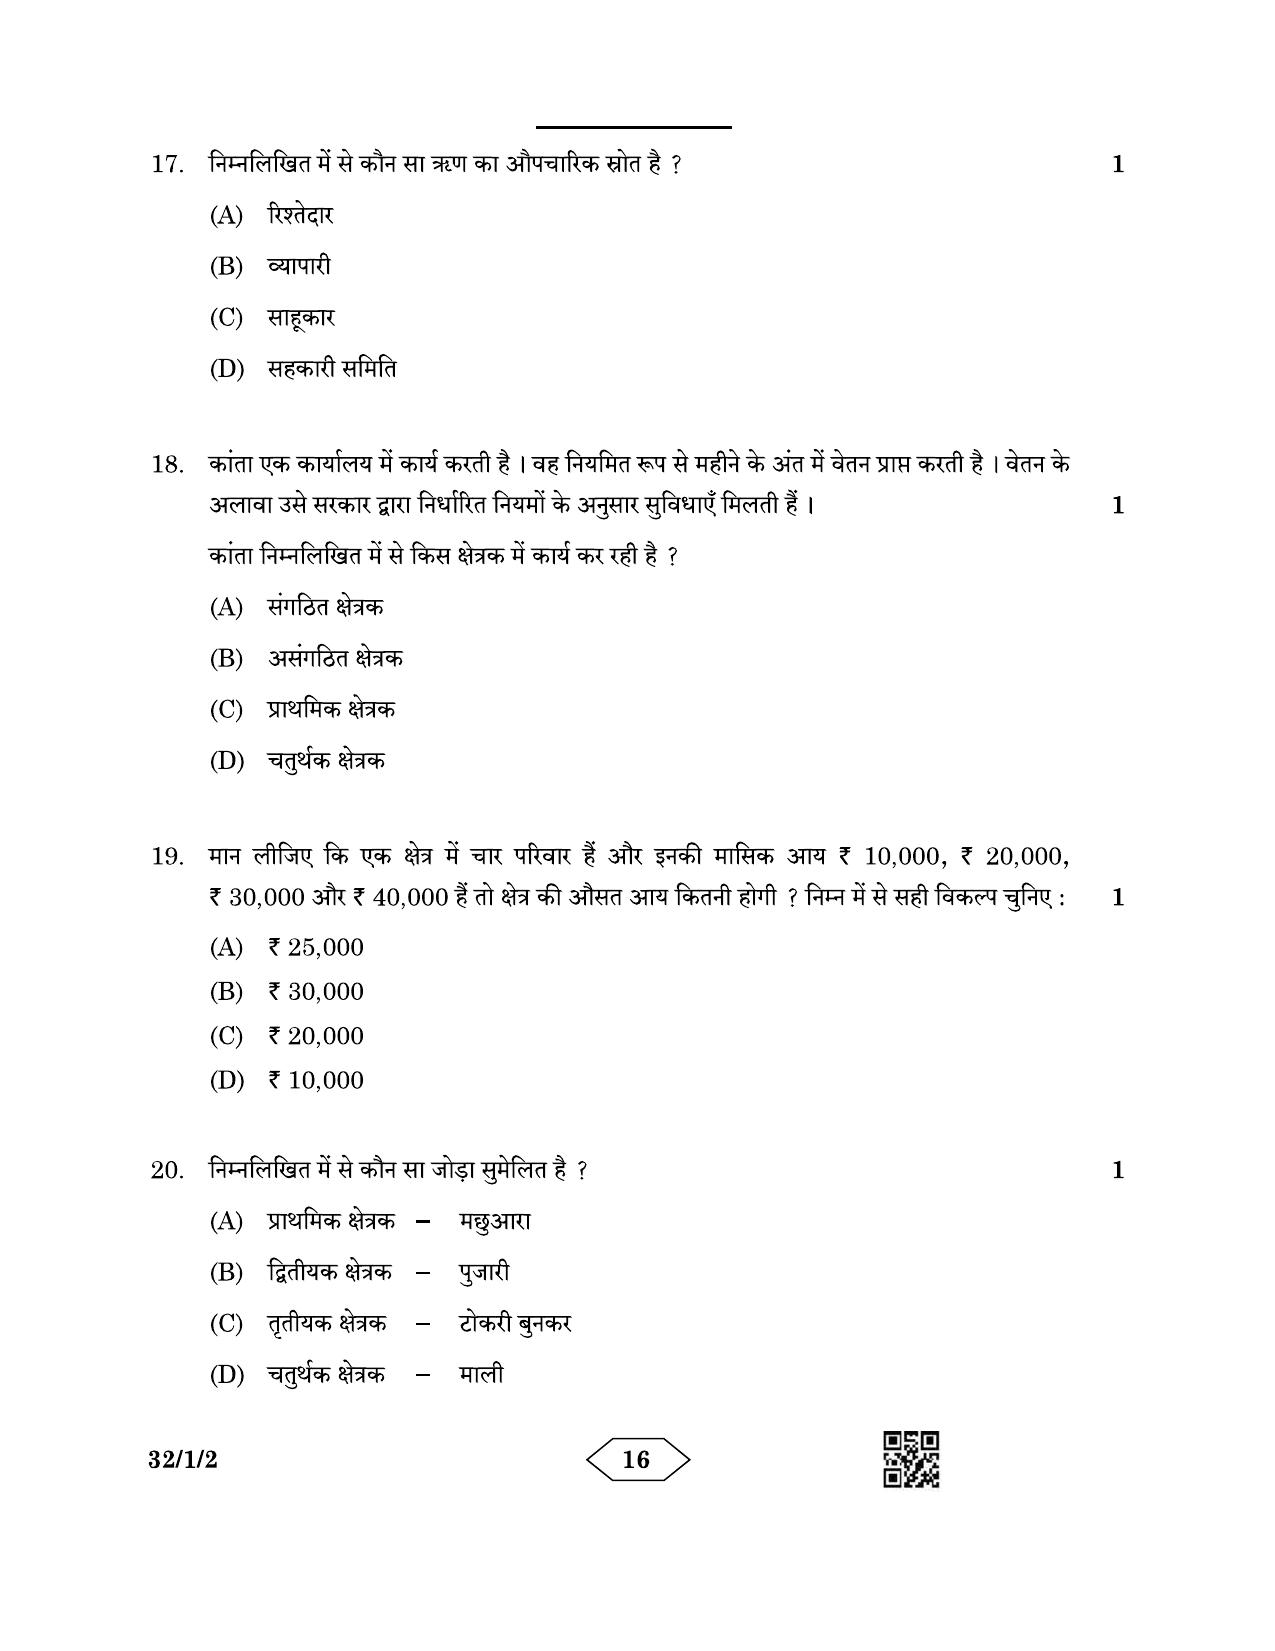 CBSE Class 10 32-1-2 Social Science 2023 Question Paper - Page 16